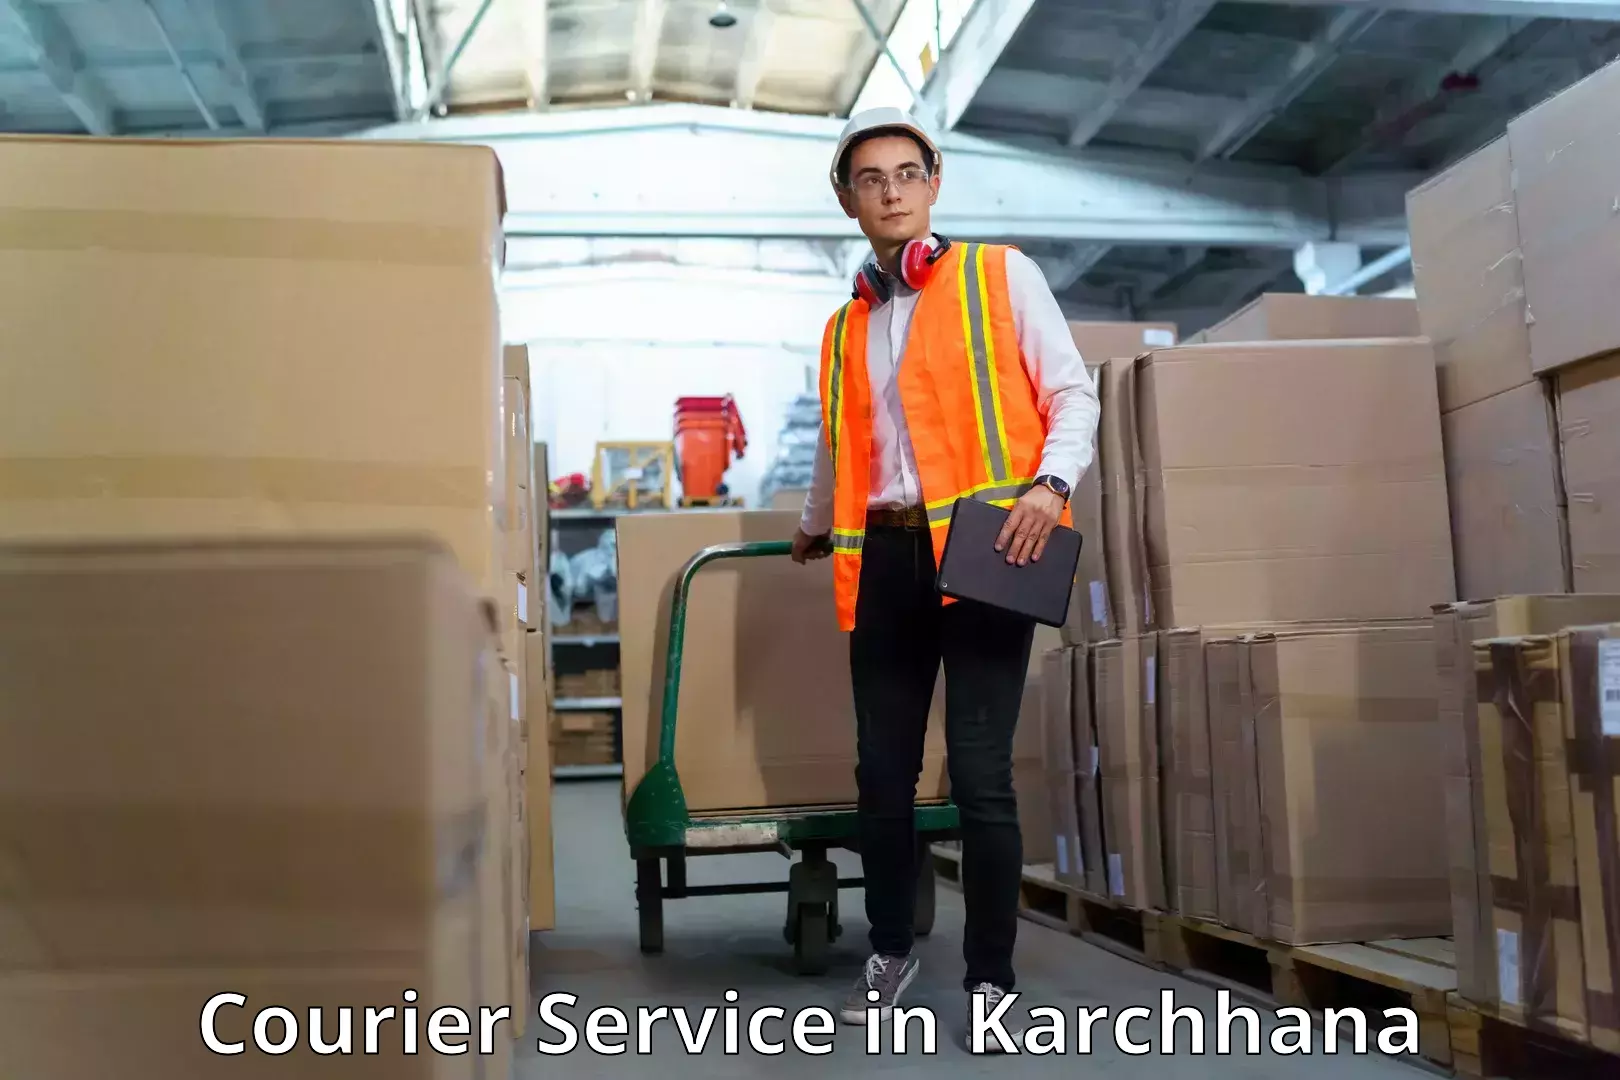 Secure package delivery in Karchhana